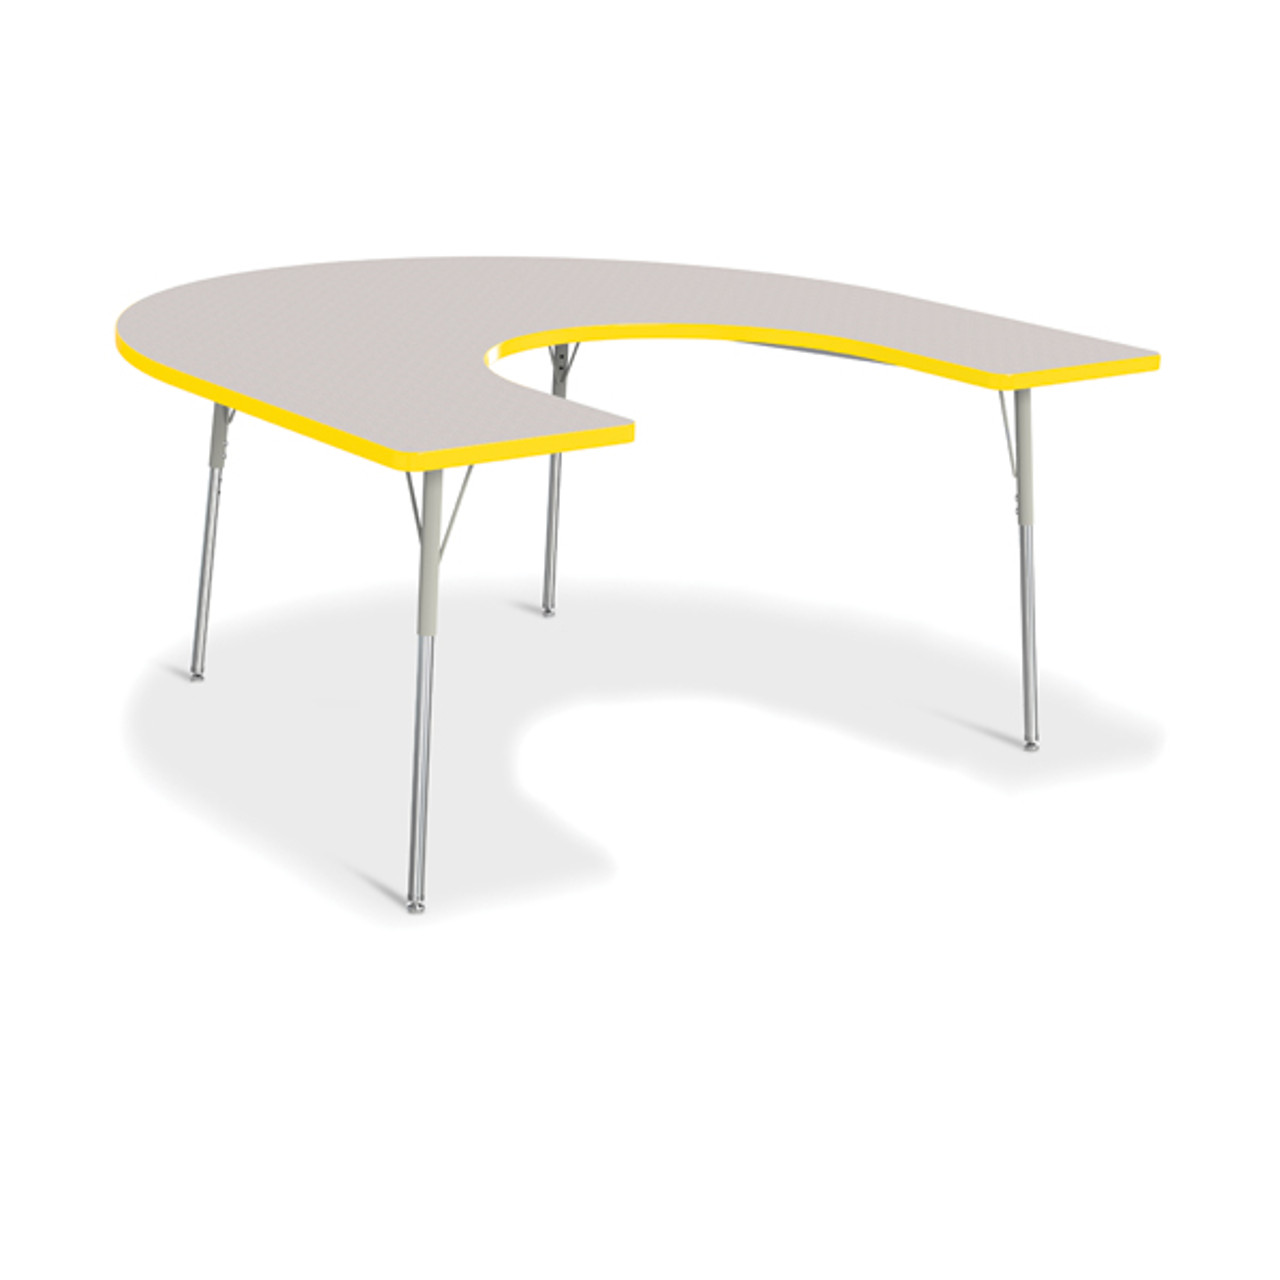 Horseshoe Activity Table - 66 X 60, 24-31 Height - Gray/Yellow/Gray -  Shields Childcare Supplies